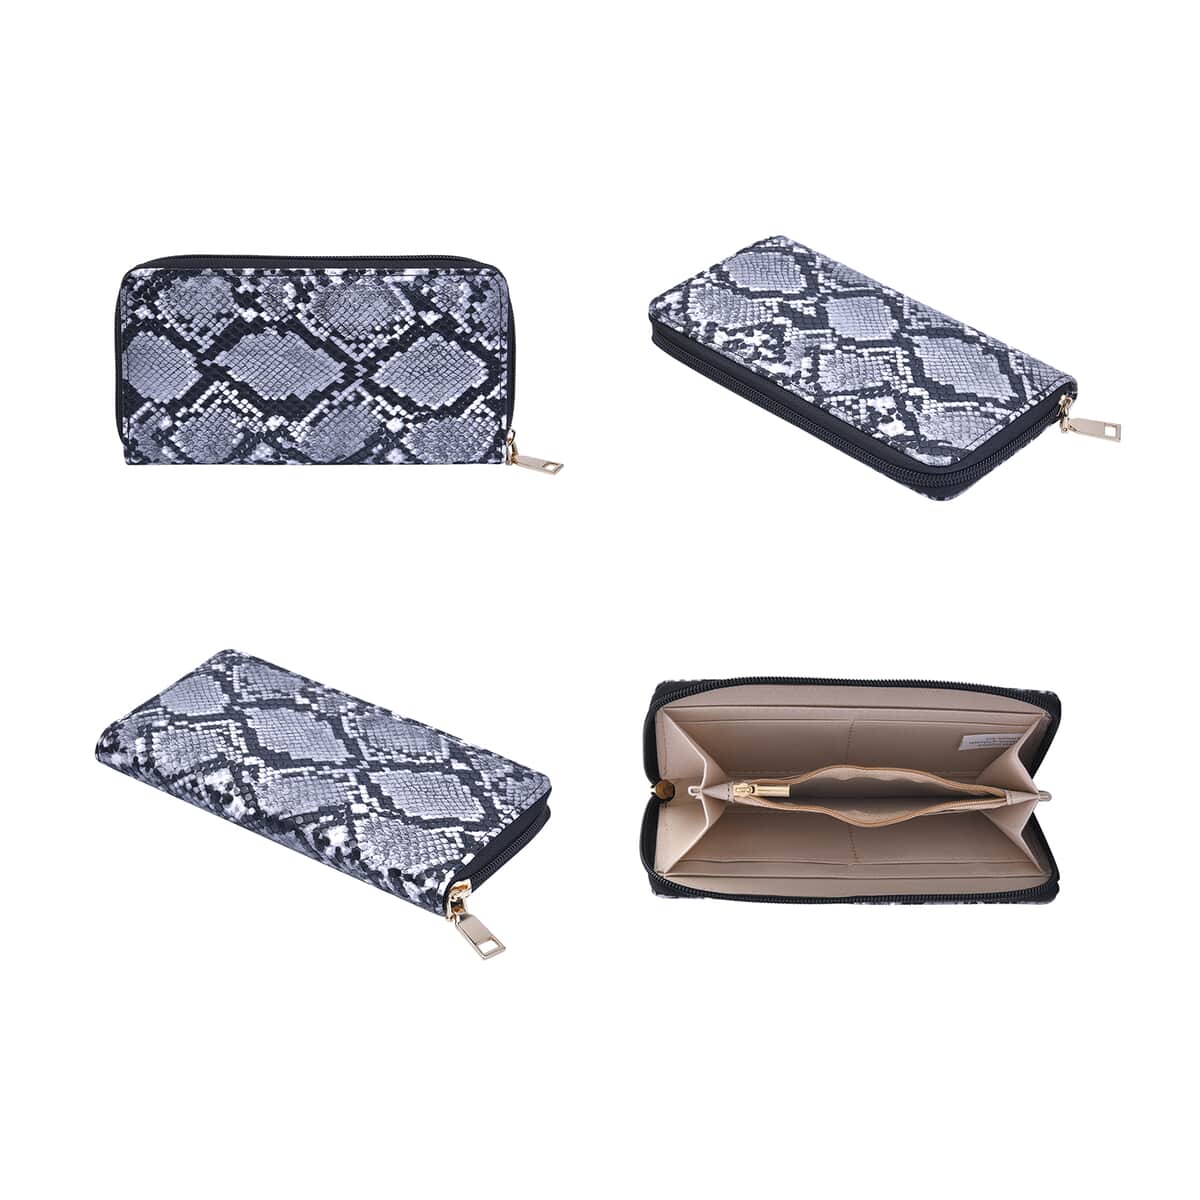 PASSAGE Black Snake Skin Pattern Faux Leather Totebag (13"x4"x10.5"), Crossbody Bag (10.24"x3.15"x7.5"), Clutch Bag (9.84"x6.3") and Wallet (7.87"x4") image number 5